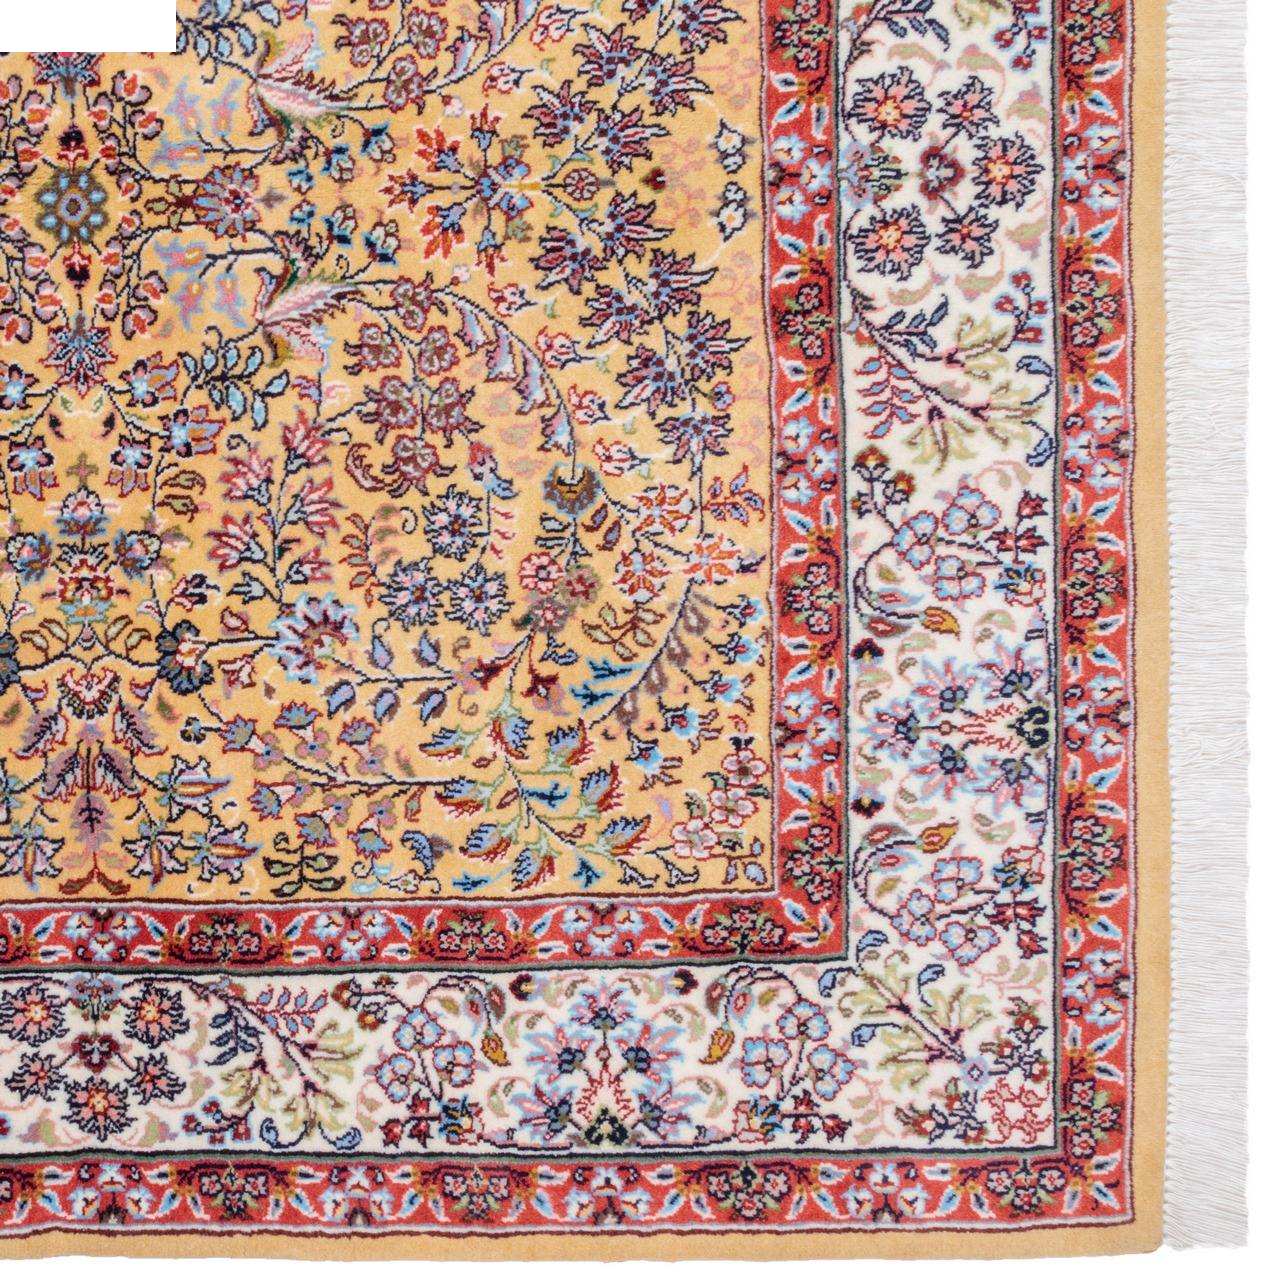 Two and a half meter handmade carpet by Persia, code 174556